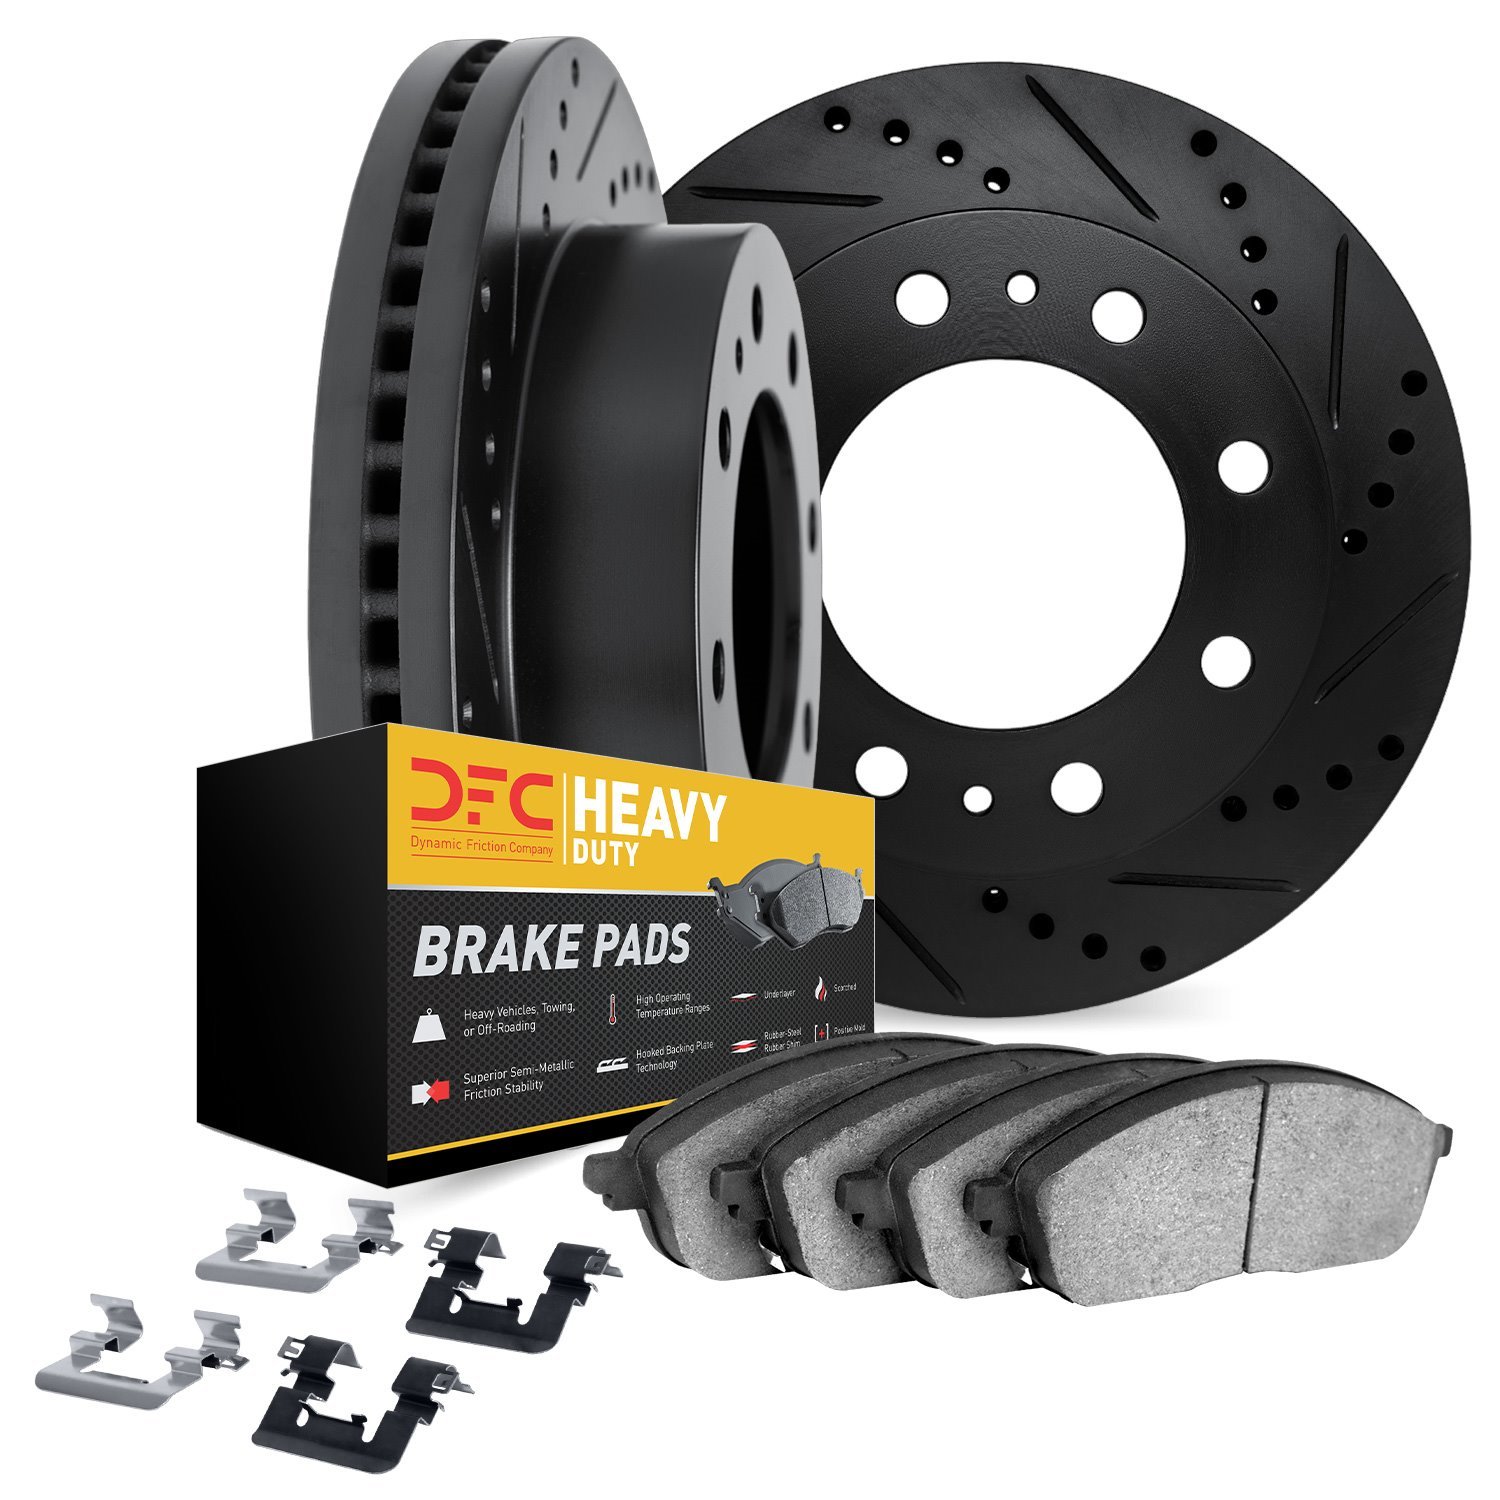 8212-99235 Drilled/Slotted Rotors w/Heavy-Duty Brake Pads Kit & Hardware [Black], Fits Select Ford/Lincoln/Mercury/Mazda, Positi